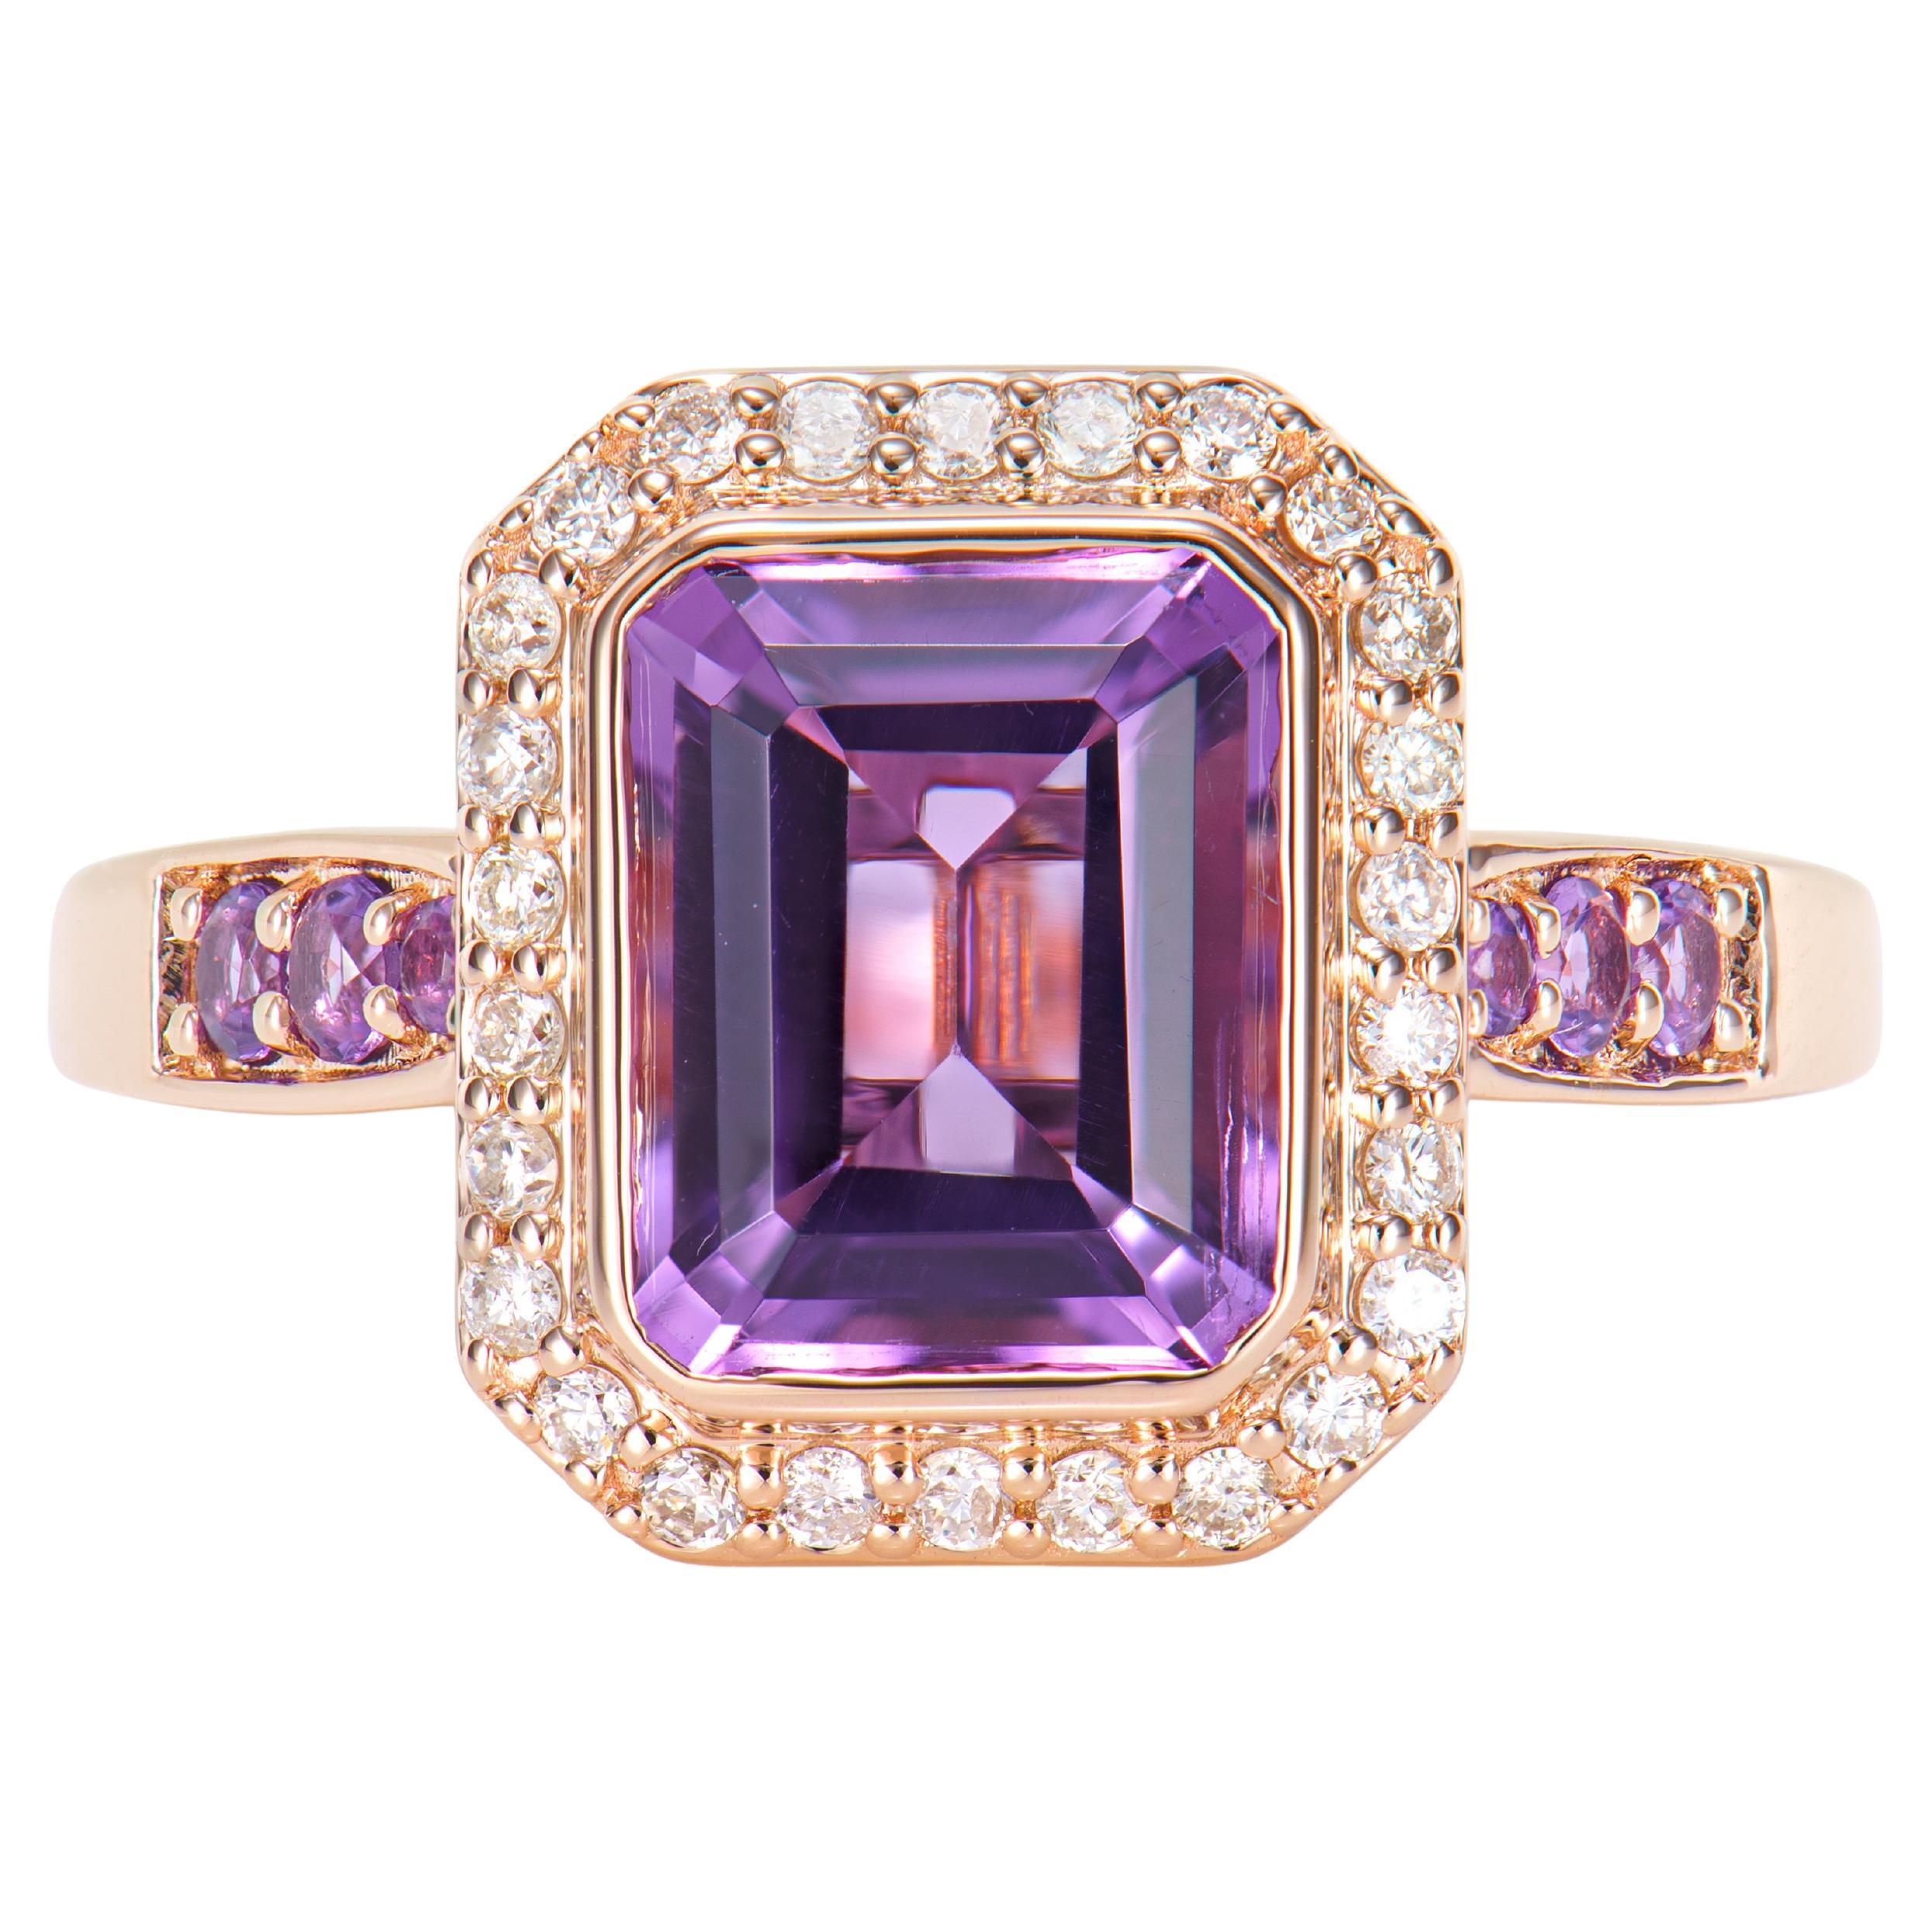 2.27 Carat Amethyst Fancy Ring in 14Karat Rose Gold with White Diamond.   For Sale